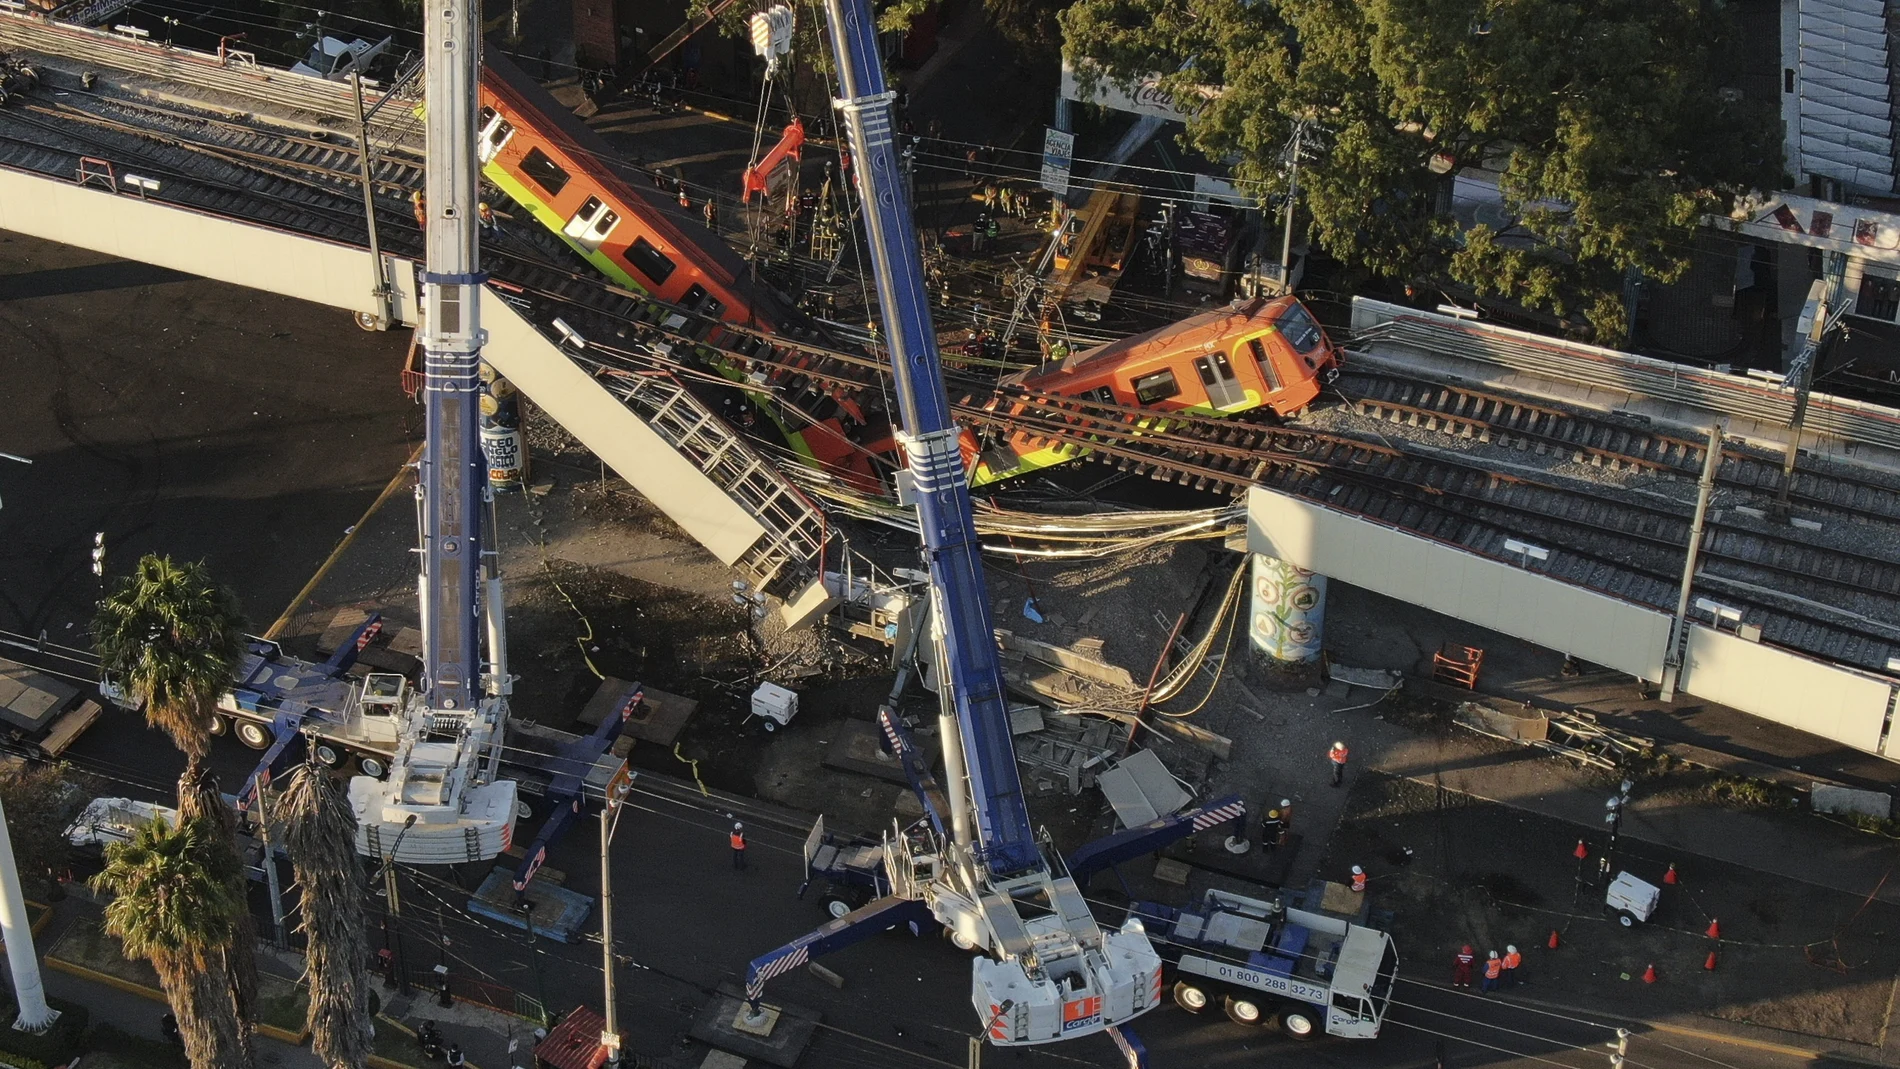 An aerial view of subway cars dangle at an angle from a collapsed elevated section of the metro, in Mexico City, Tuesday, May 4, 2021. The elevated section of Mexico City's metro collapsed late Monday killing at least 23 people and injuring at least 79, city officials said. (AP Photo/Fernando Llano)